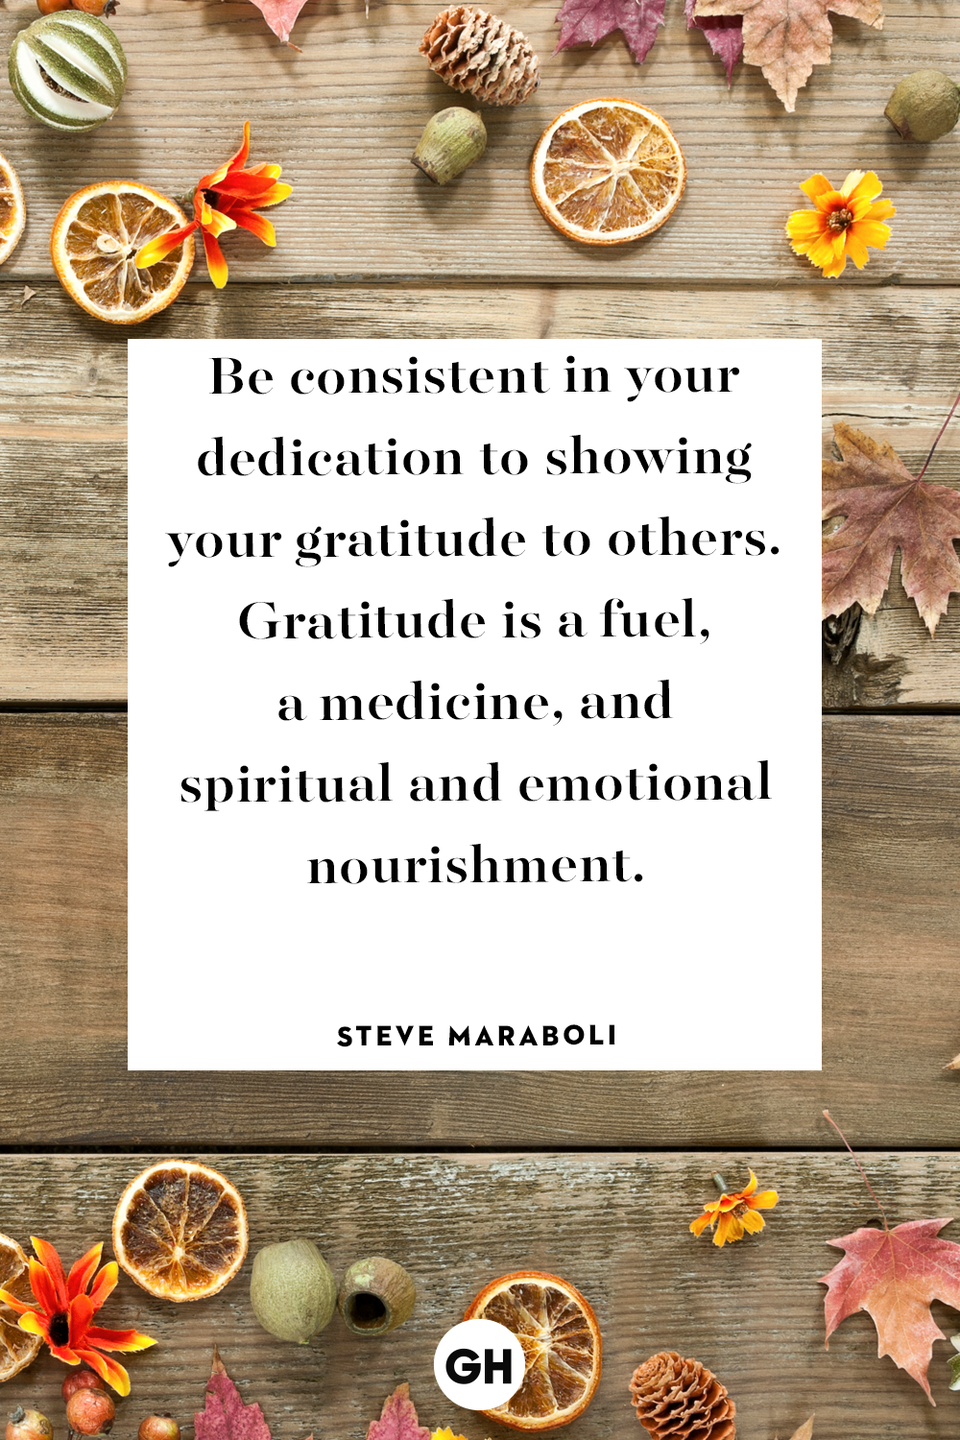 <p>Be consistent in your dedication to showing your gratitude to others. Gratitude is a fuel, a medicine and spiritual and emotional nourishment.</p>